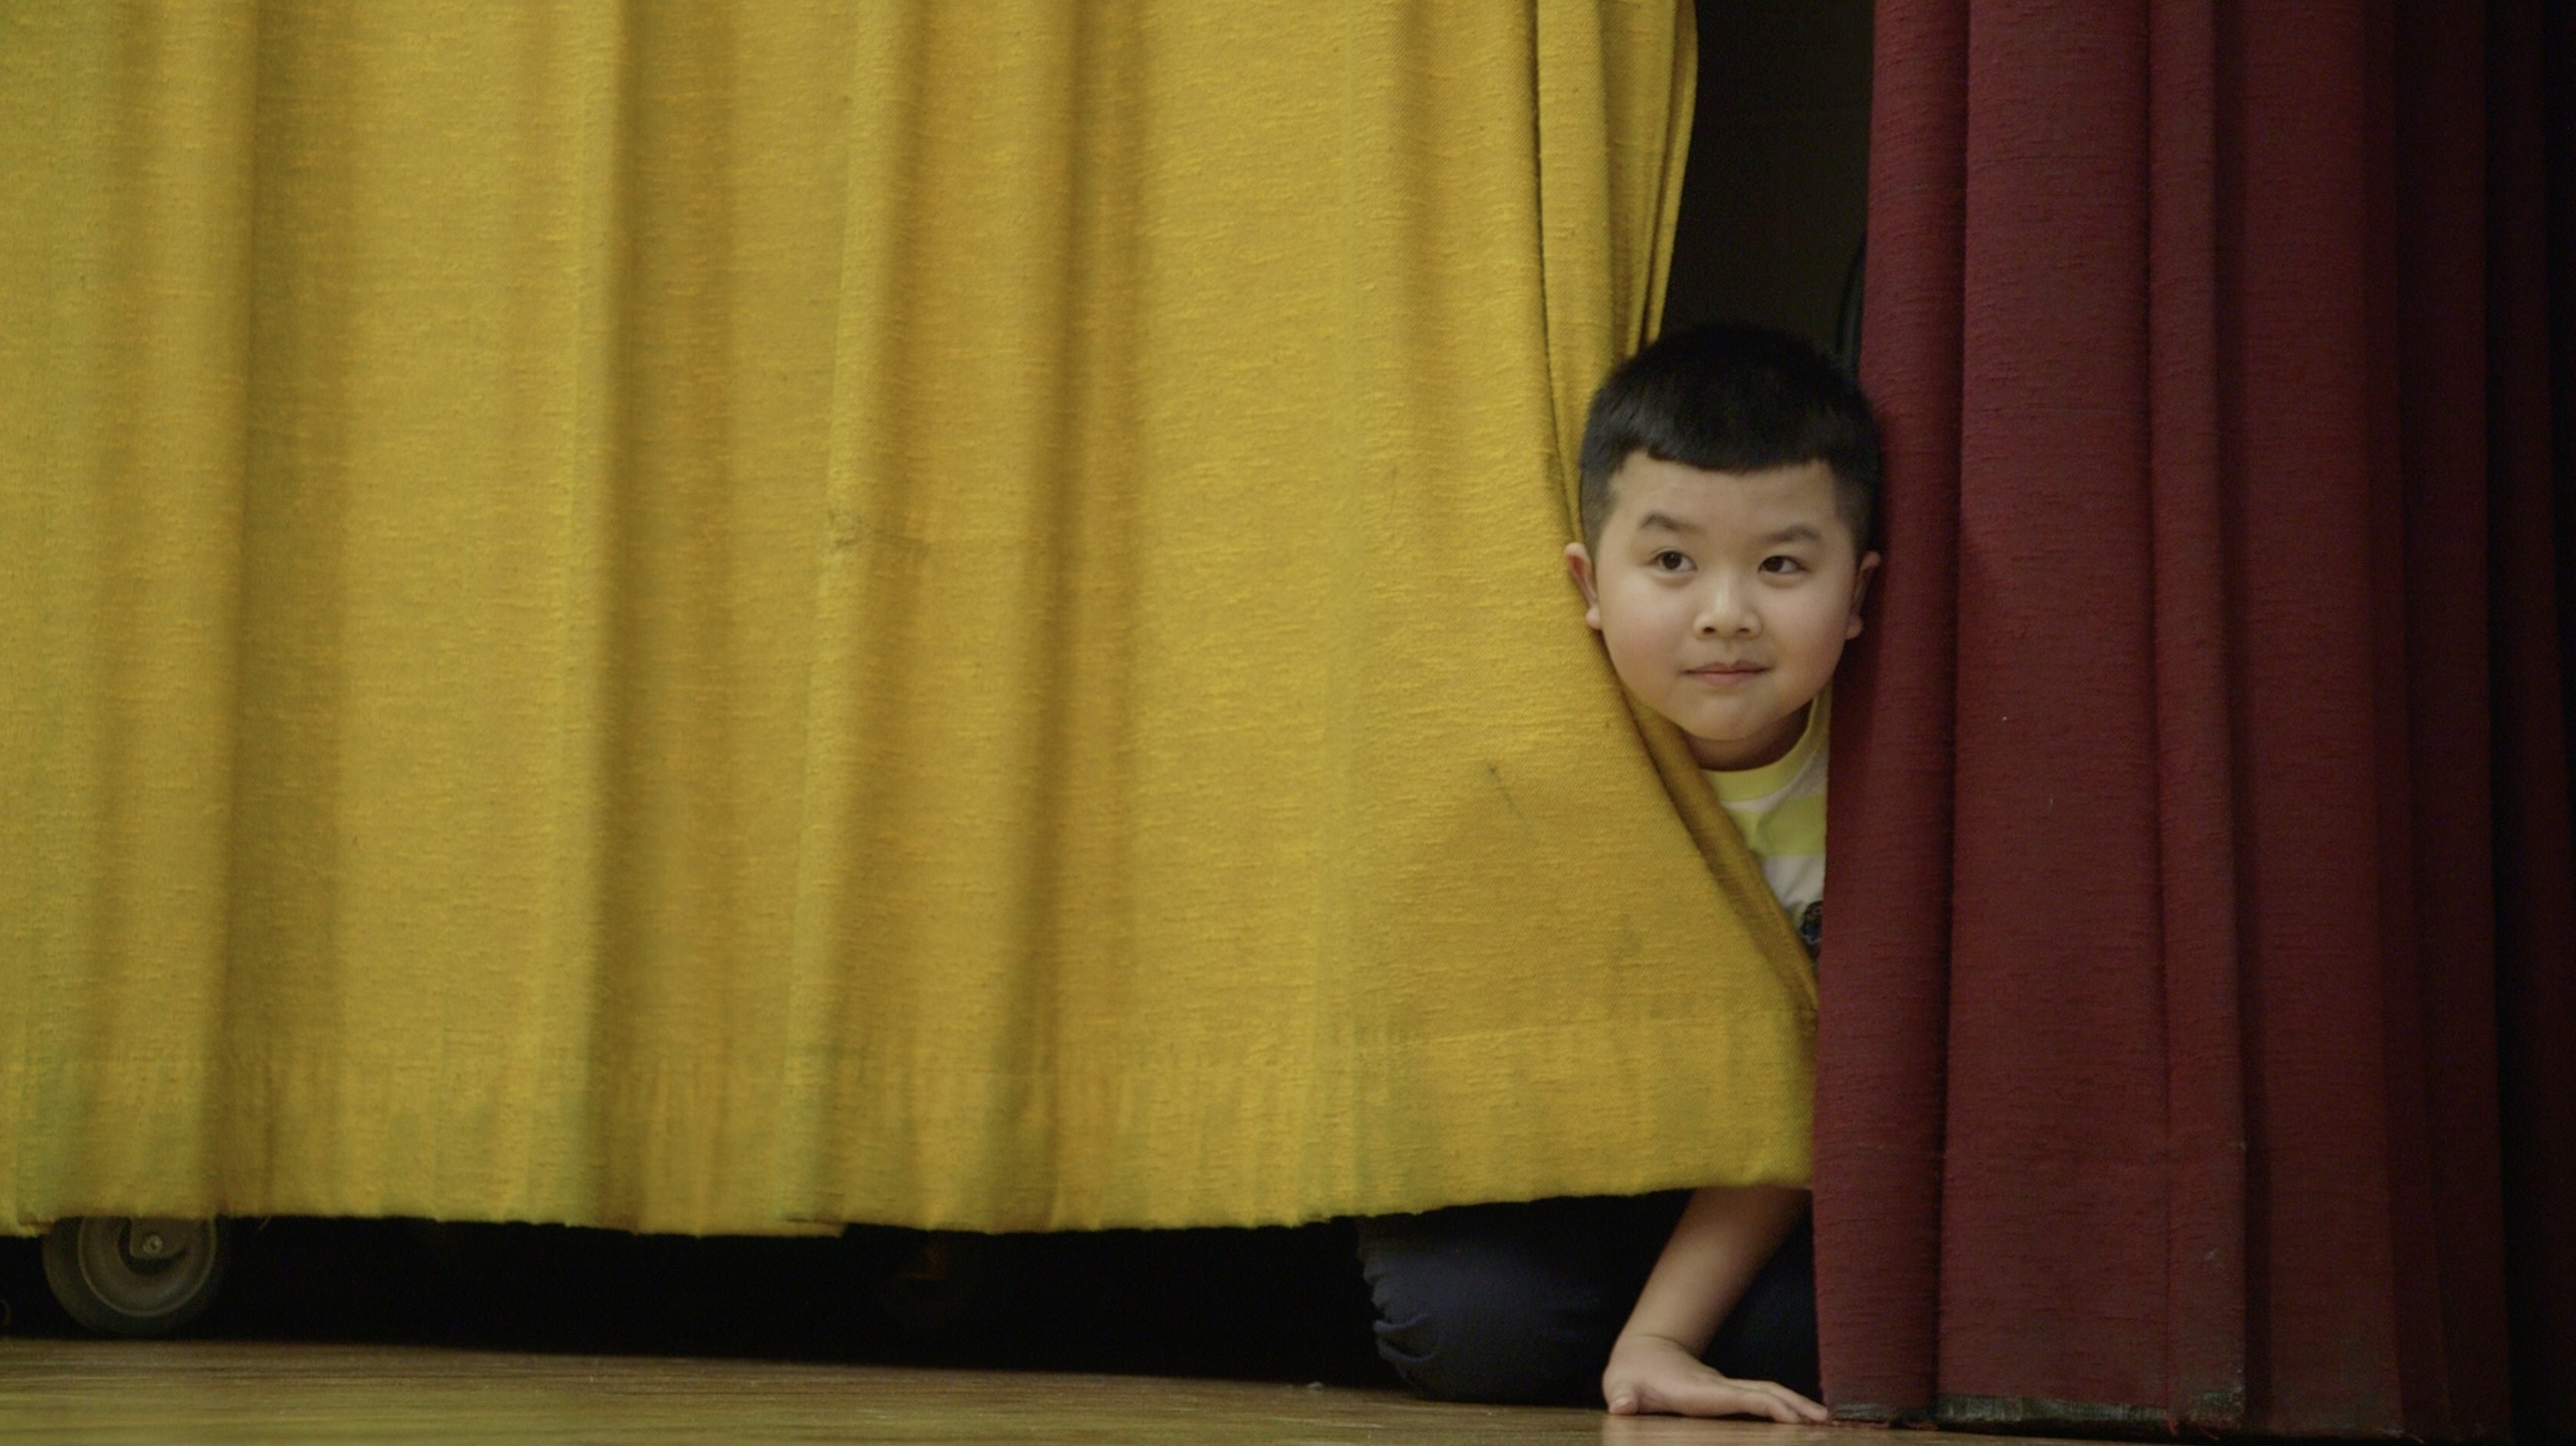 A student at rehearsal as part of the PS 124 Theatre Club.